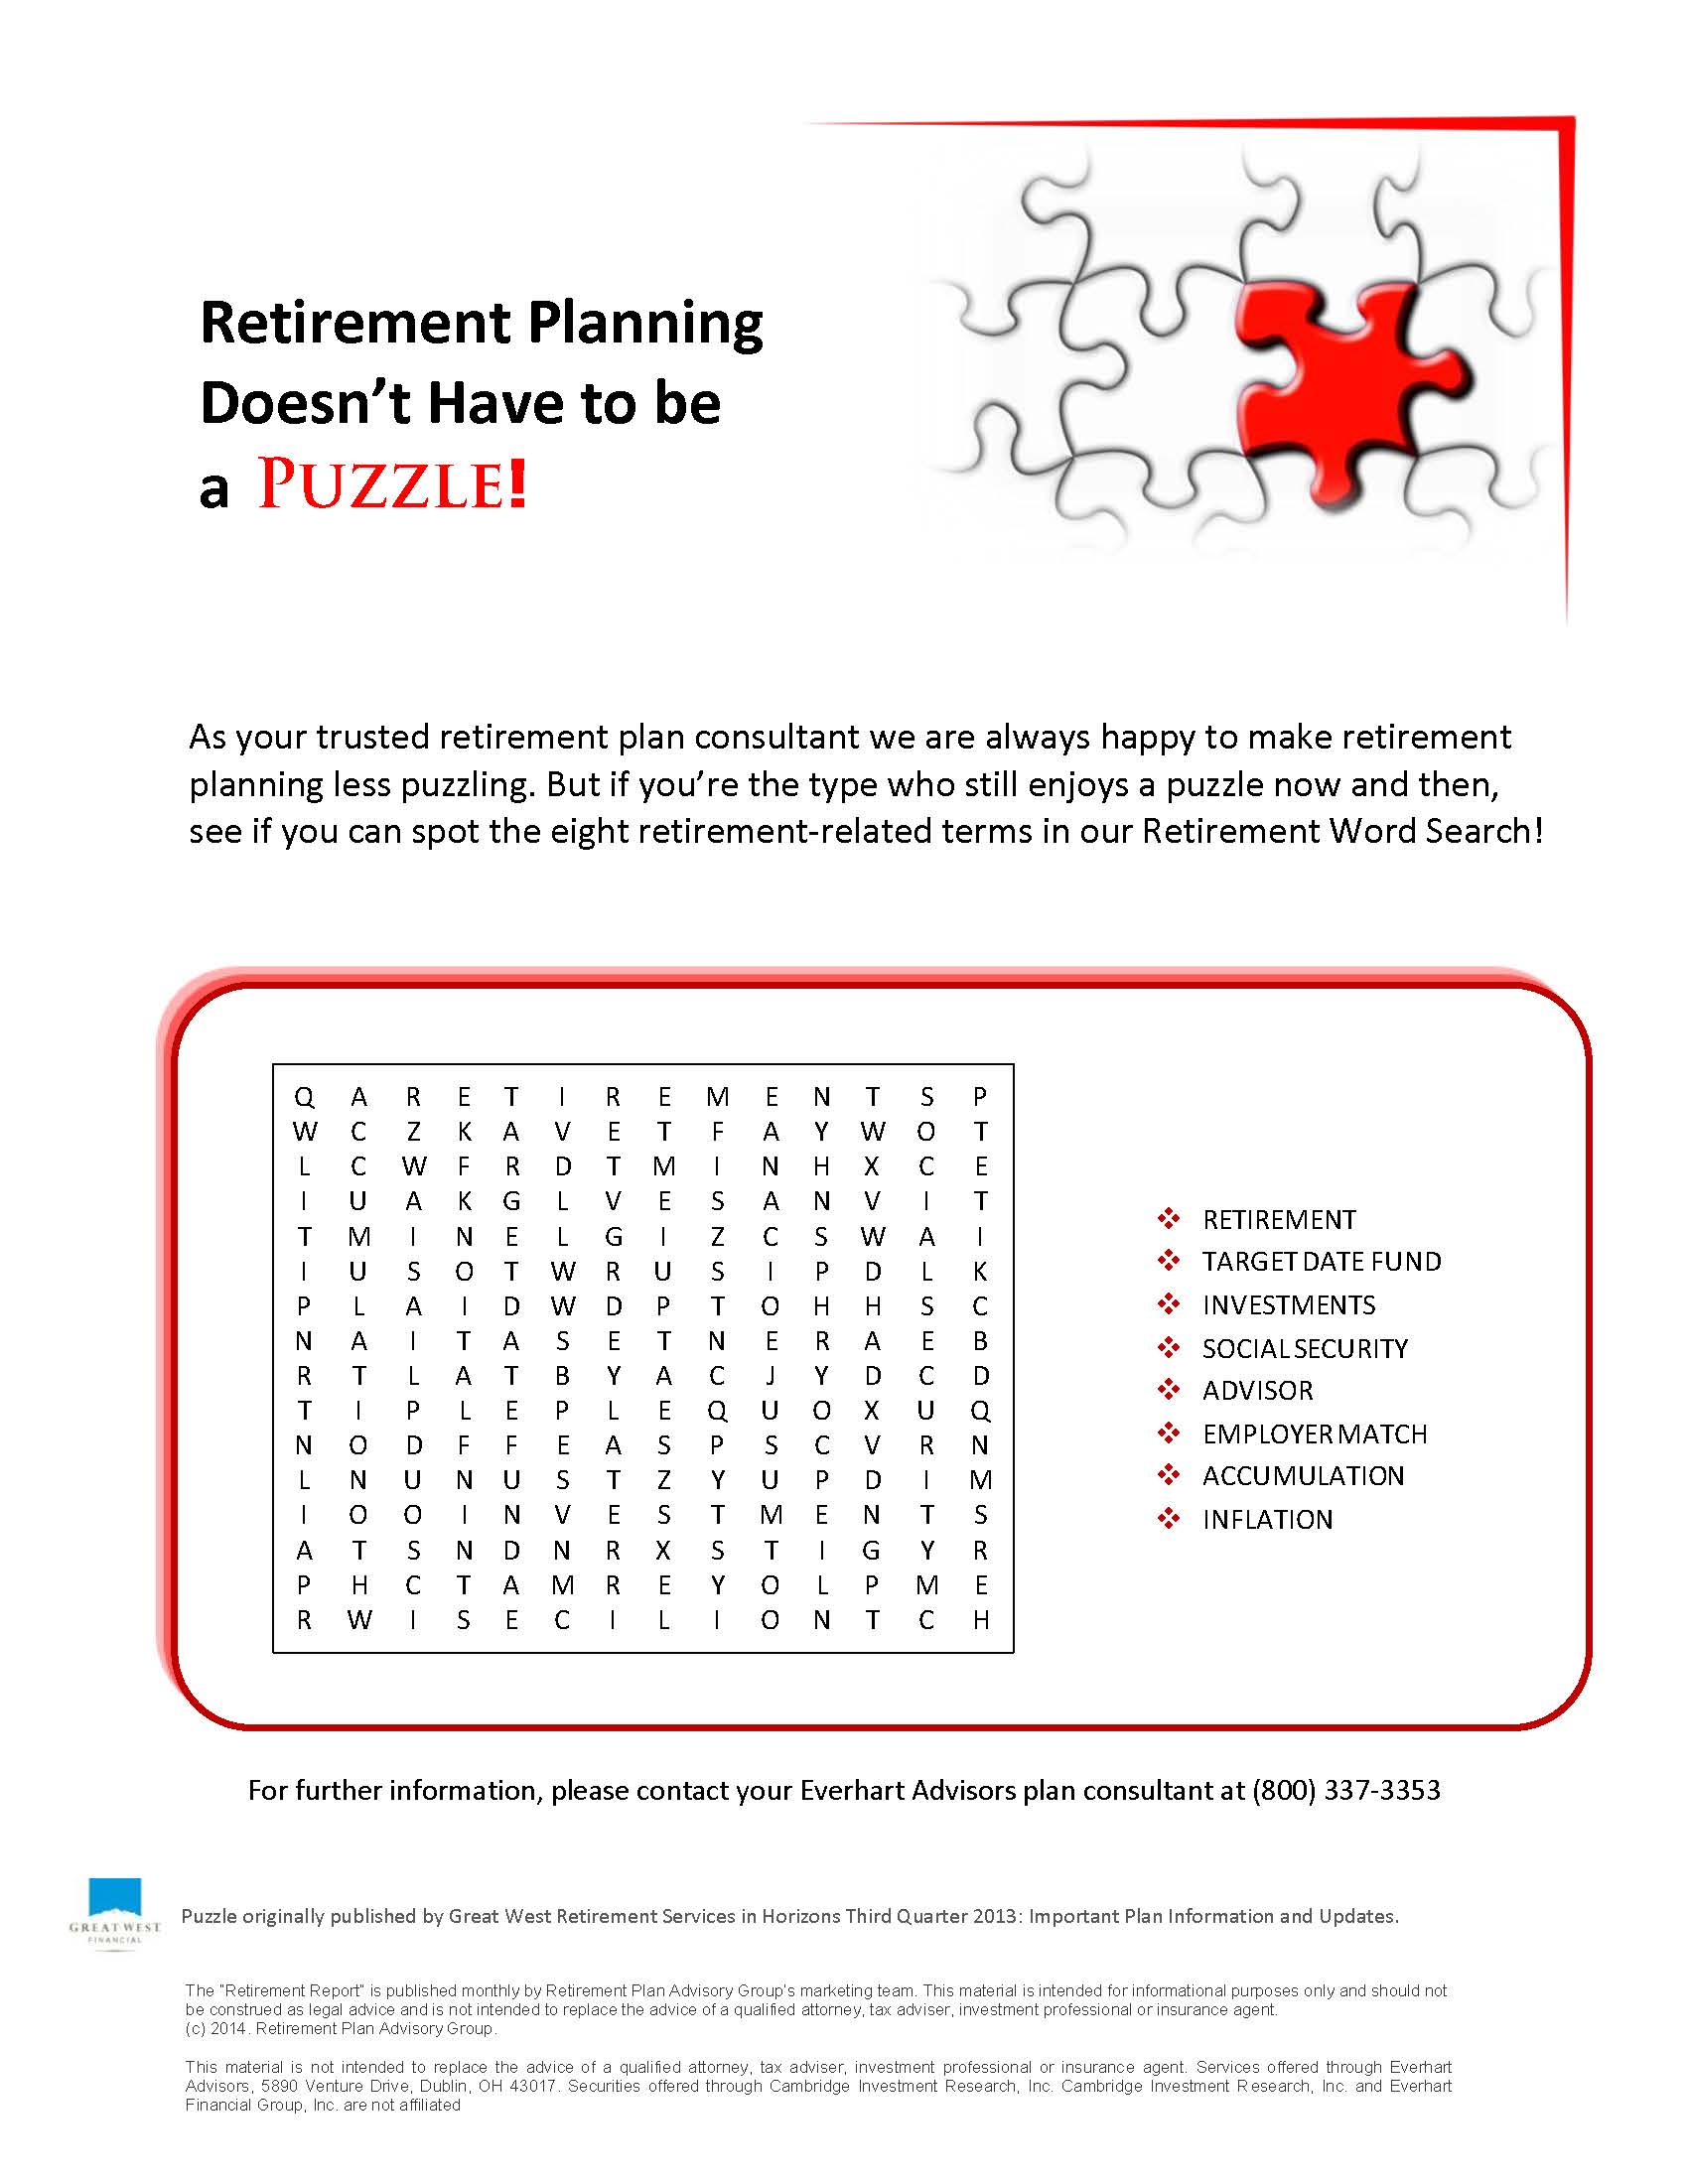 02-February-2014-Retirement-Planning-Puzzle-RPAG